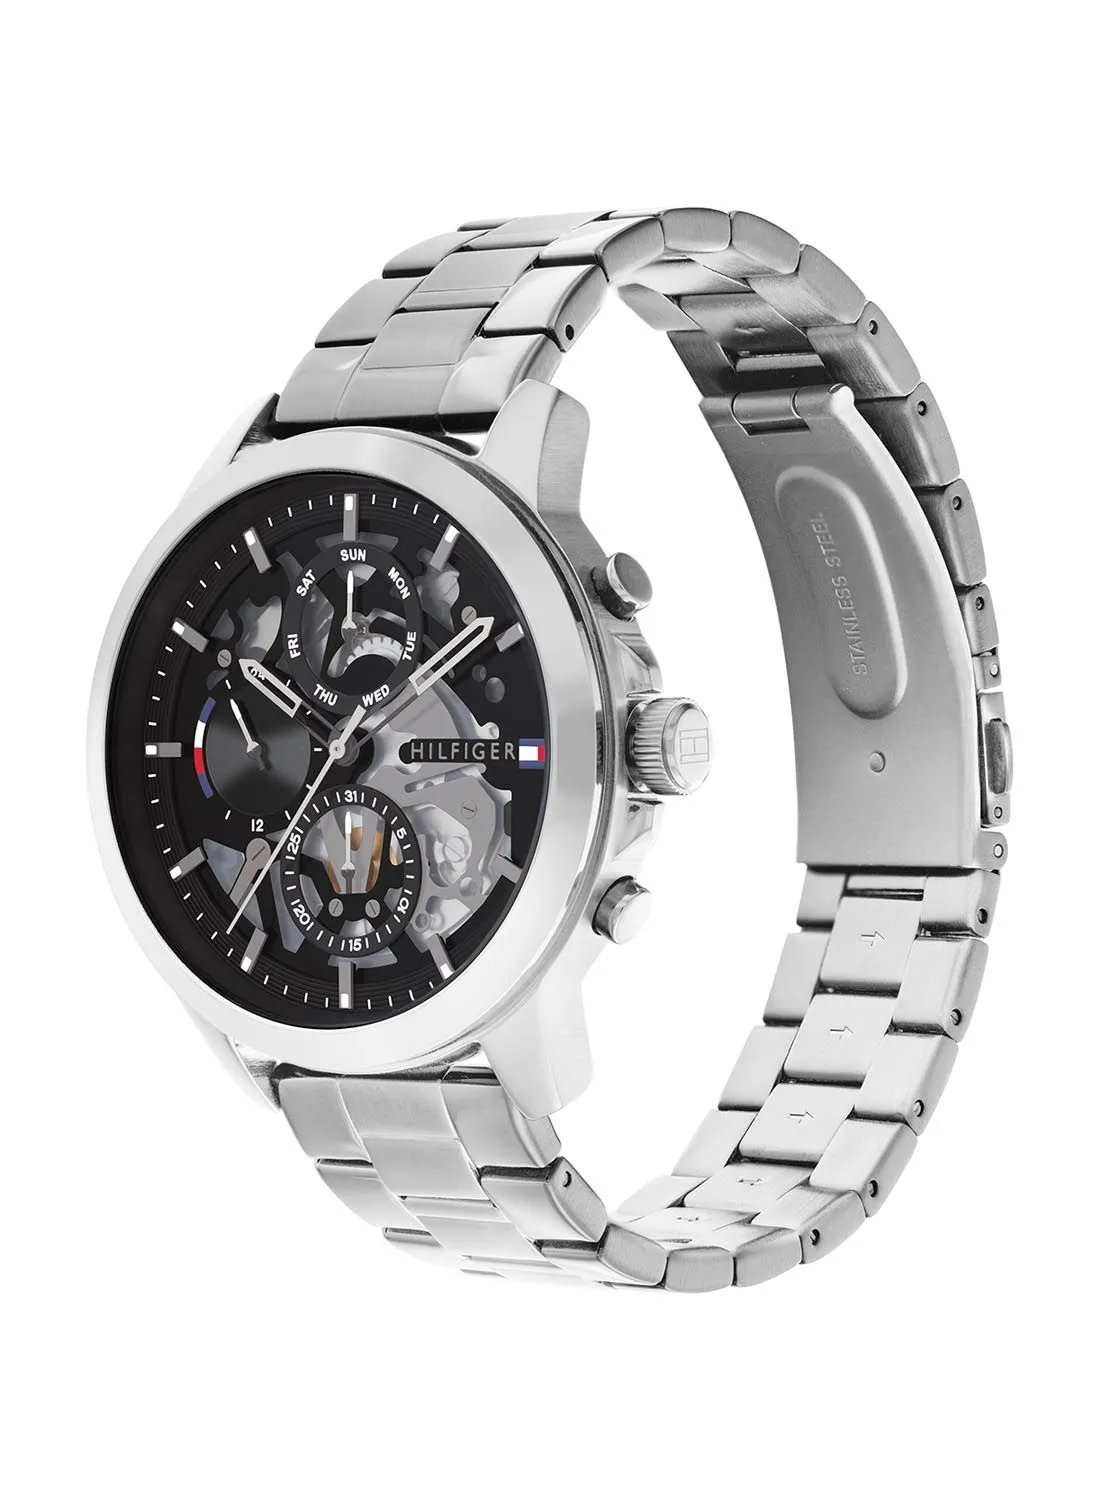 TOMMY HILFIGER TOMMY HILFIGER HENRY MEN's BLACK DIAL, STAINLESS STEEL WATCH - 1710477